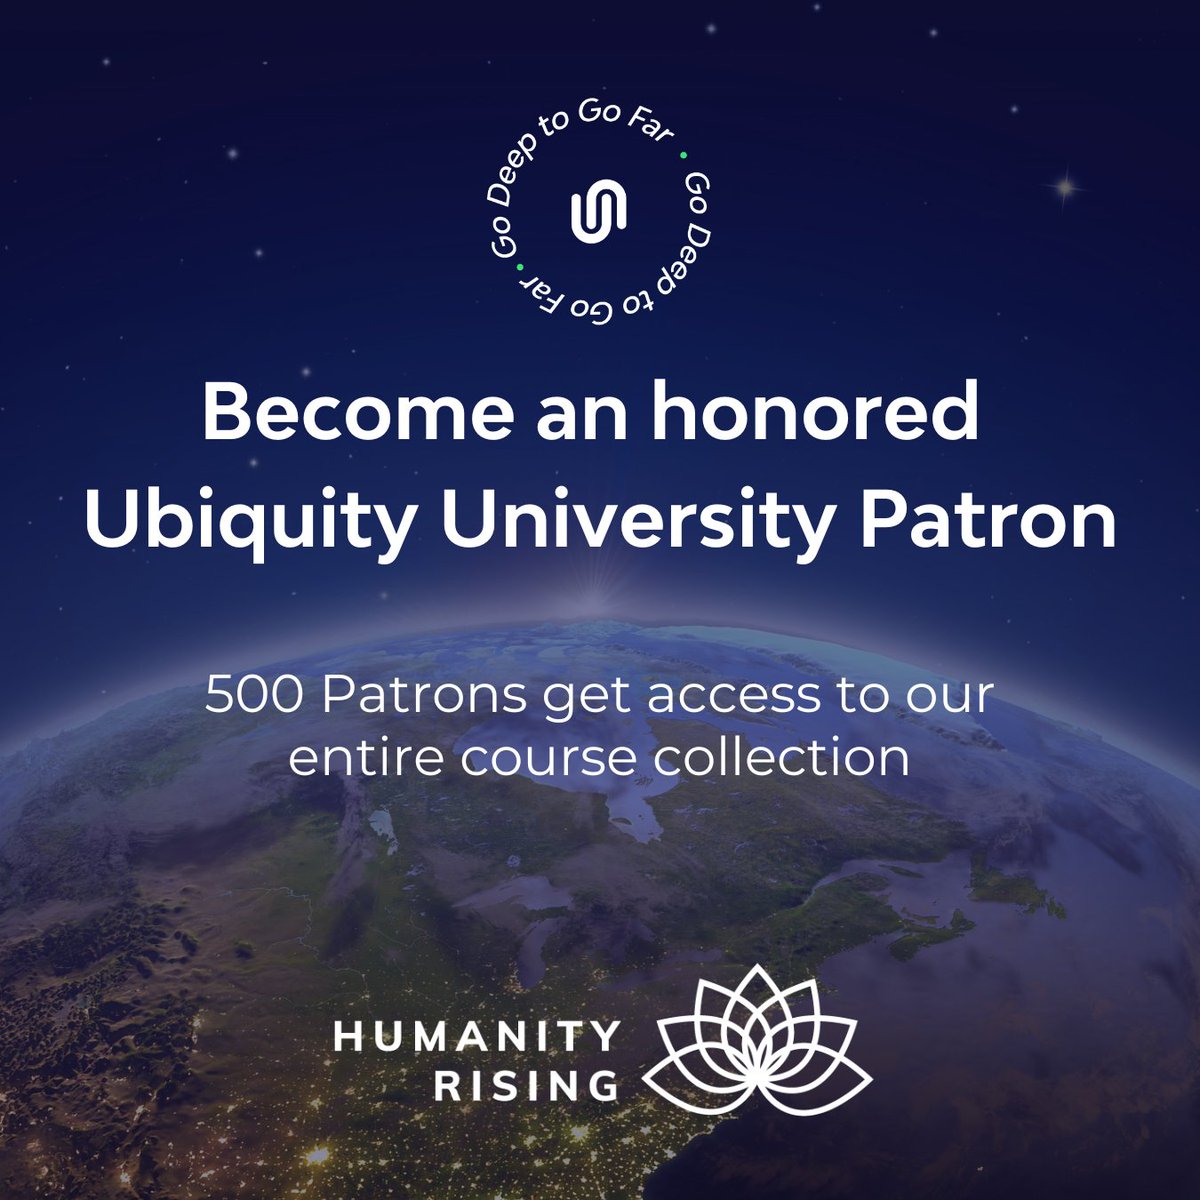 We’re looking for 500 patrons to invest $500 dollars each in Ubiquity. In doing so, you’ll be funding a movement dedicated to steering the world onto a different course at this pivotal moment. #learnwhatyoulove #futureofeducation #consciousnessevolution #humanityrising